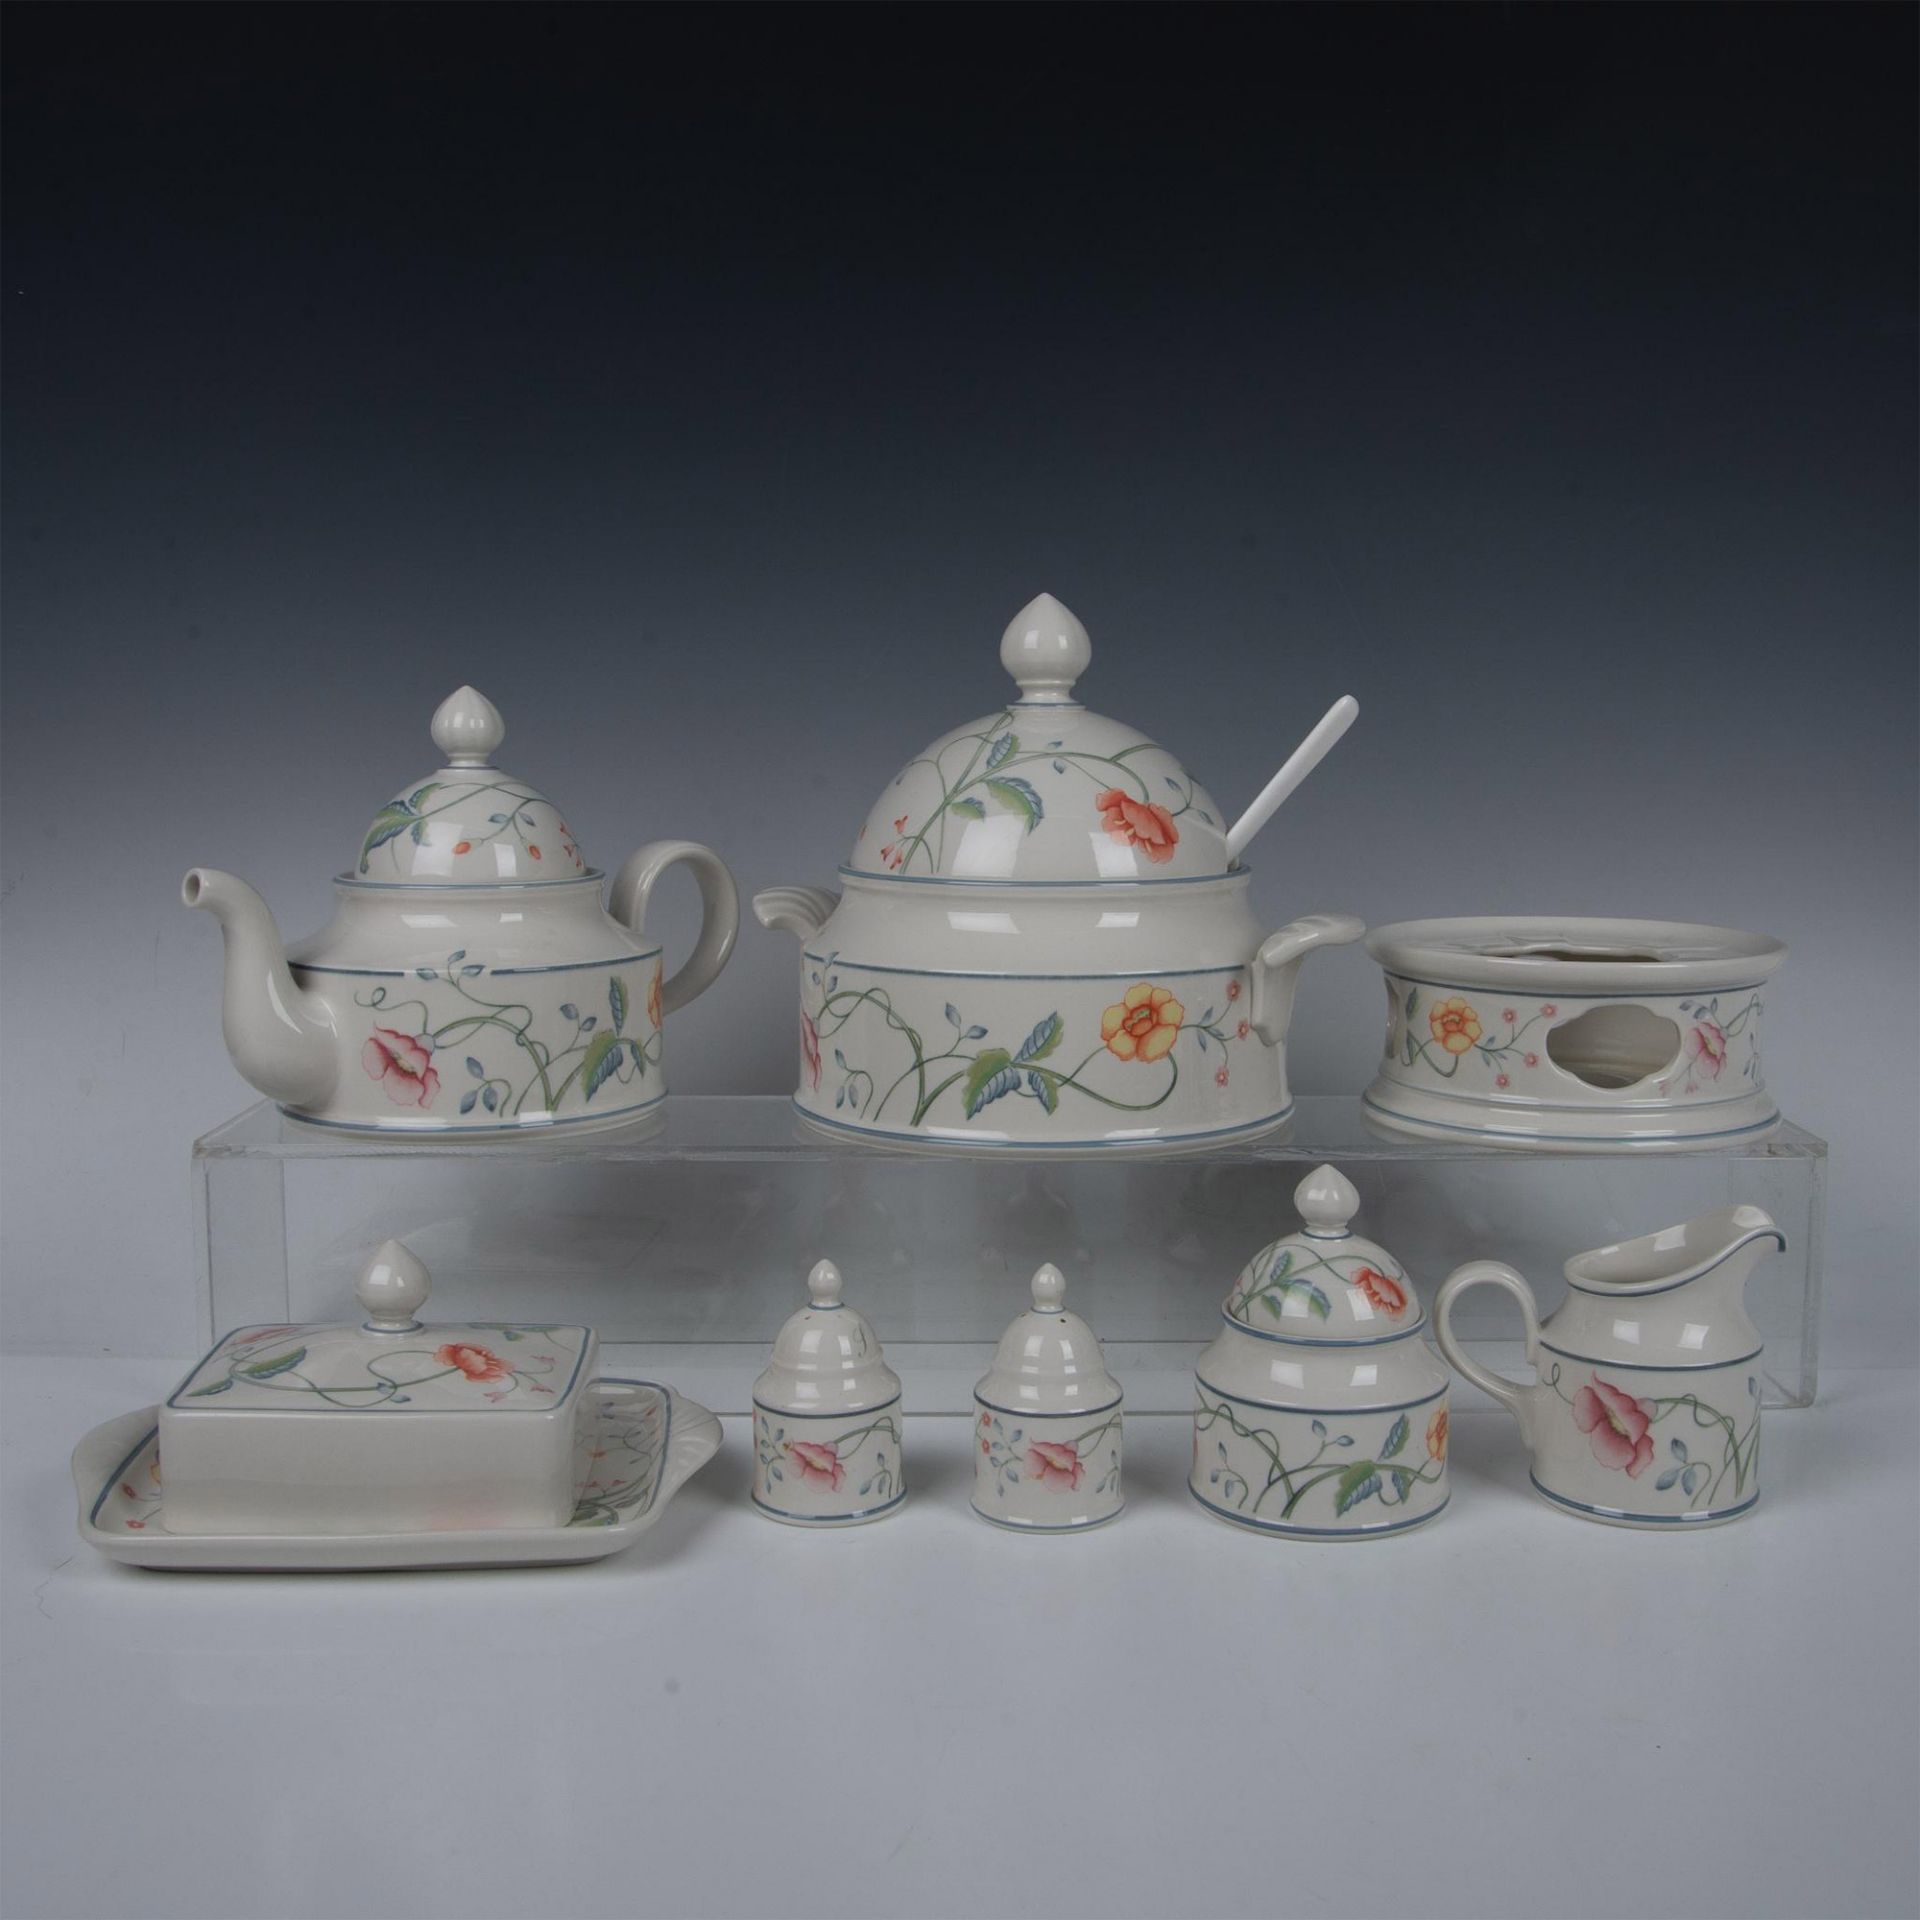 7pc Villeroy and Boch Tableware Grouping, Albertina Pattern